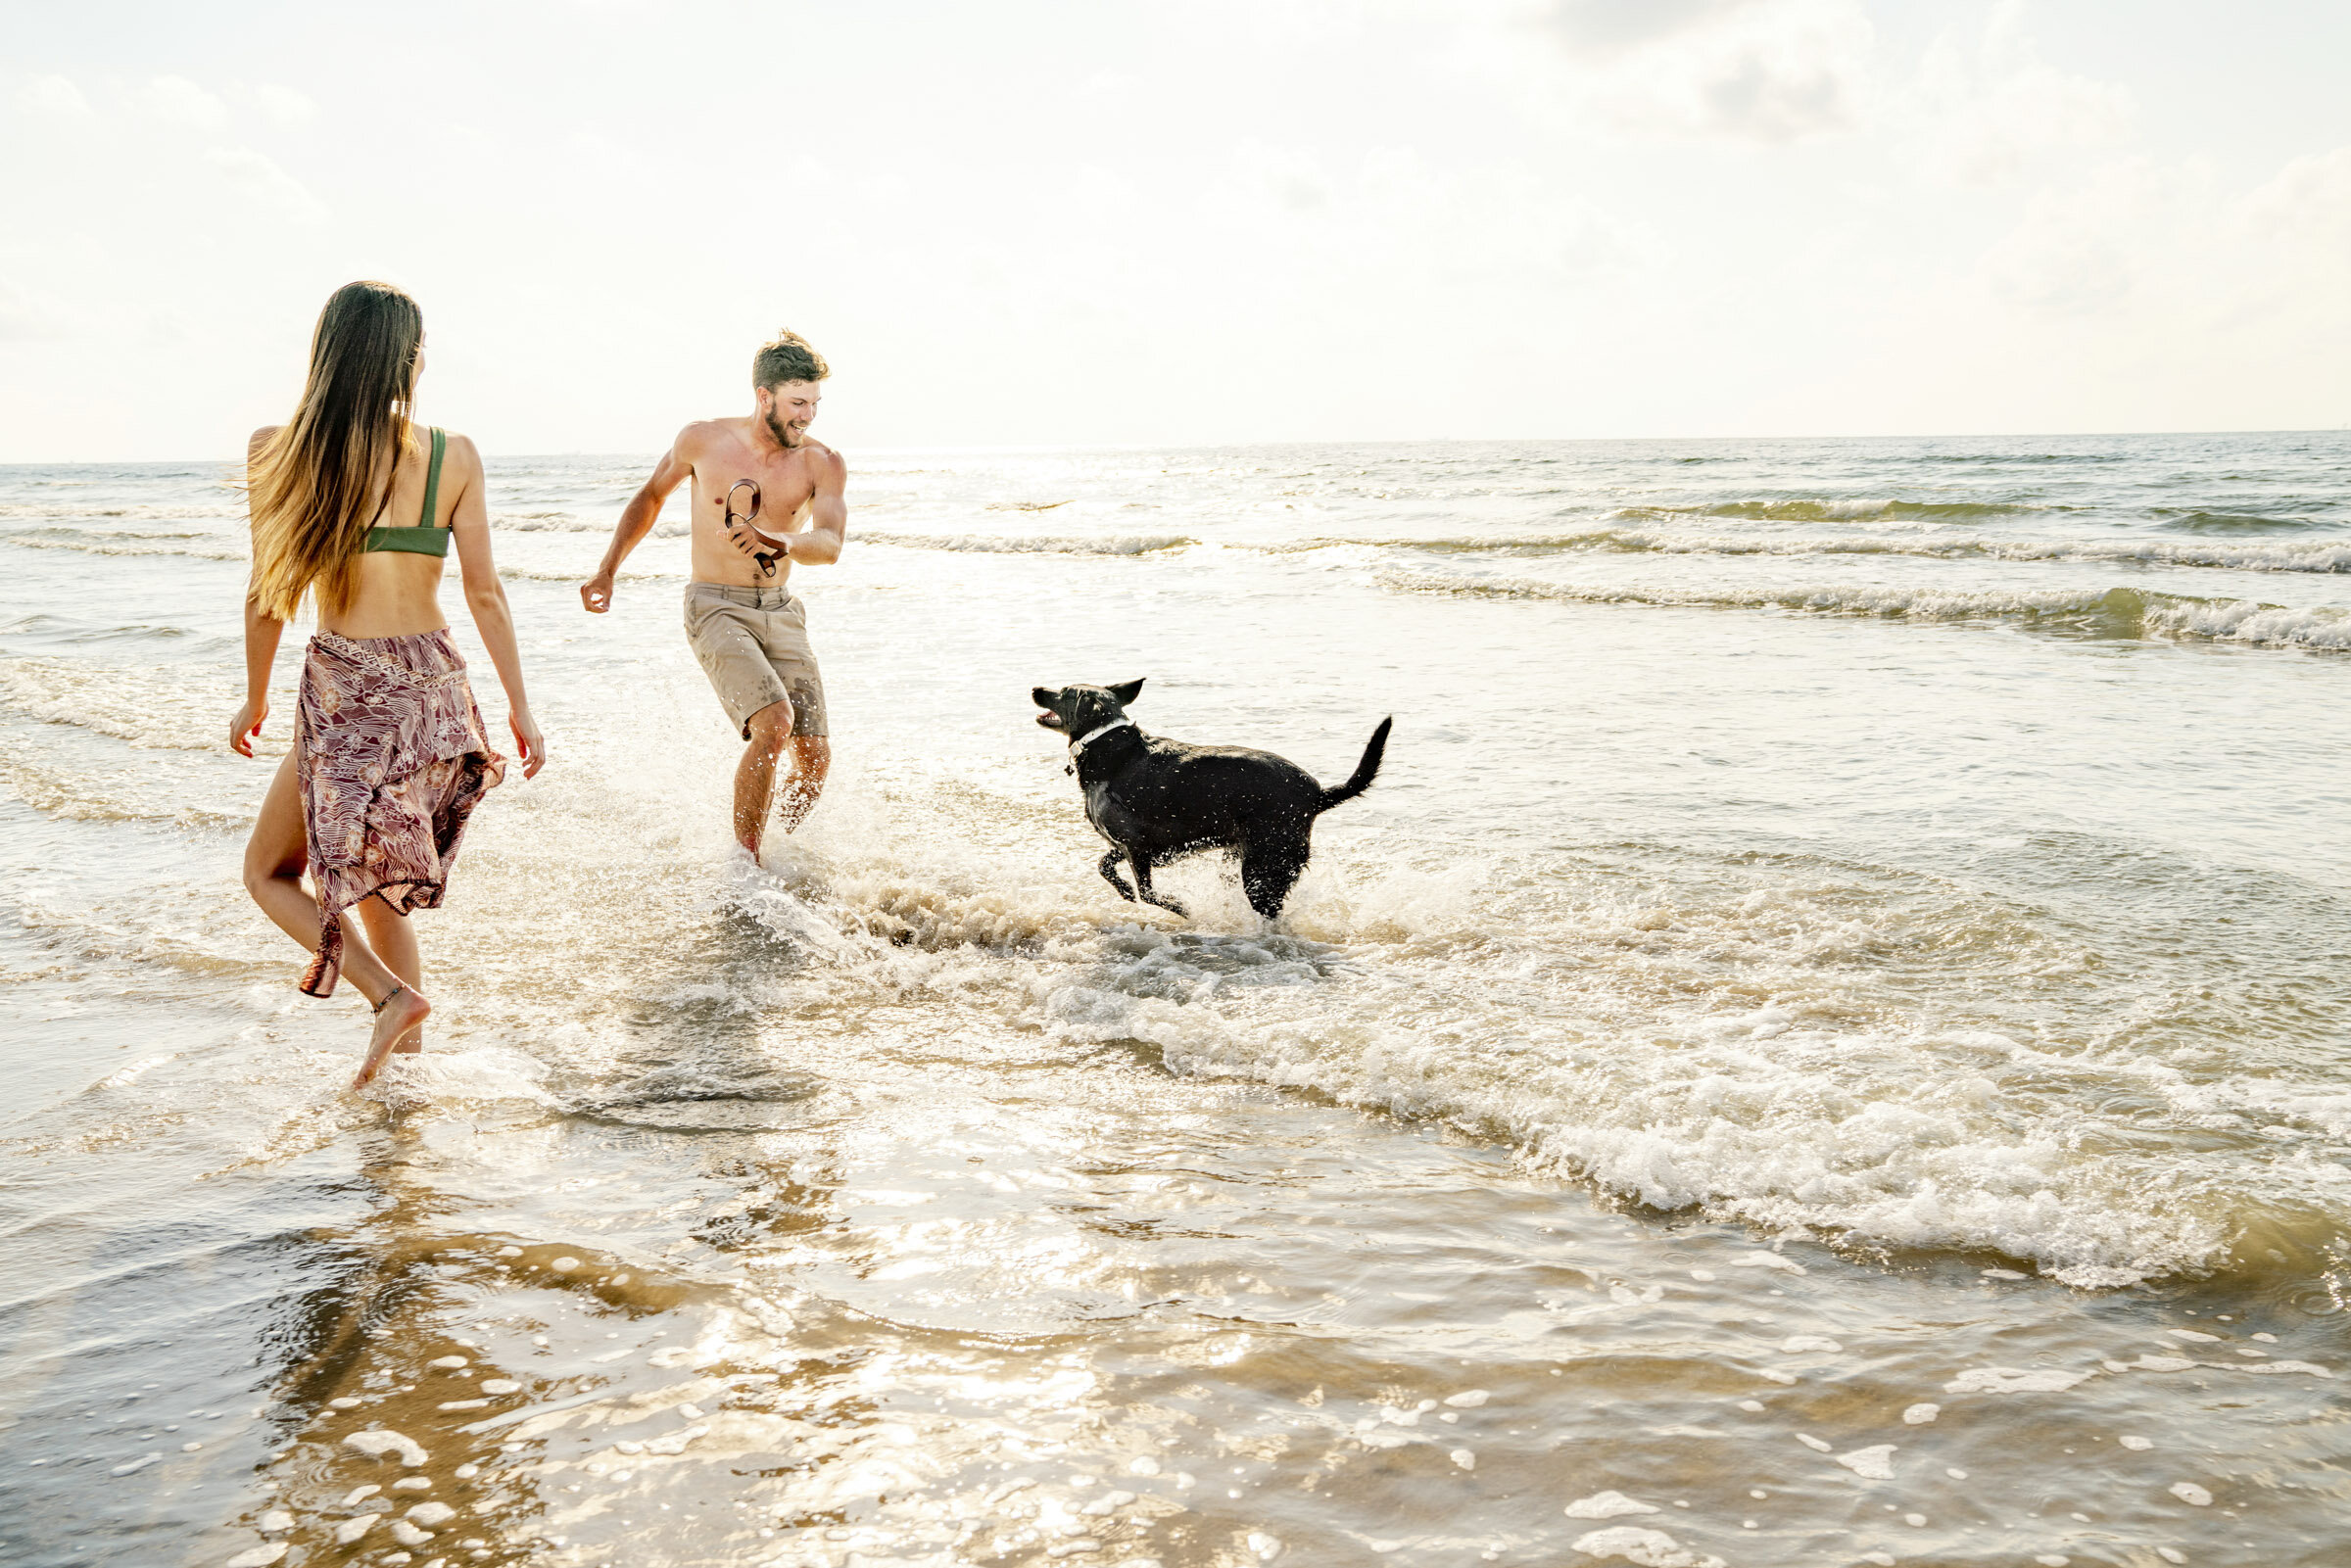 Couple-playing-with-dog-in-ocean-Inti-St-Clair-Lifestyle-is20190612_Palmilla_2813.jpg